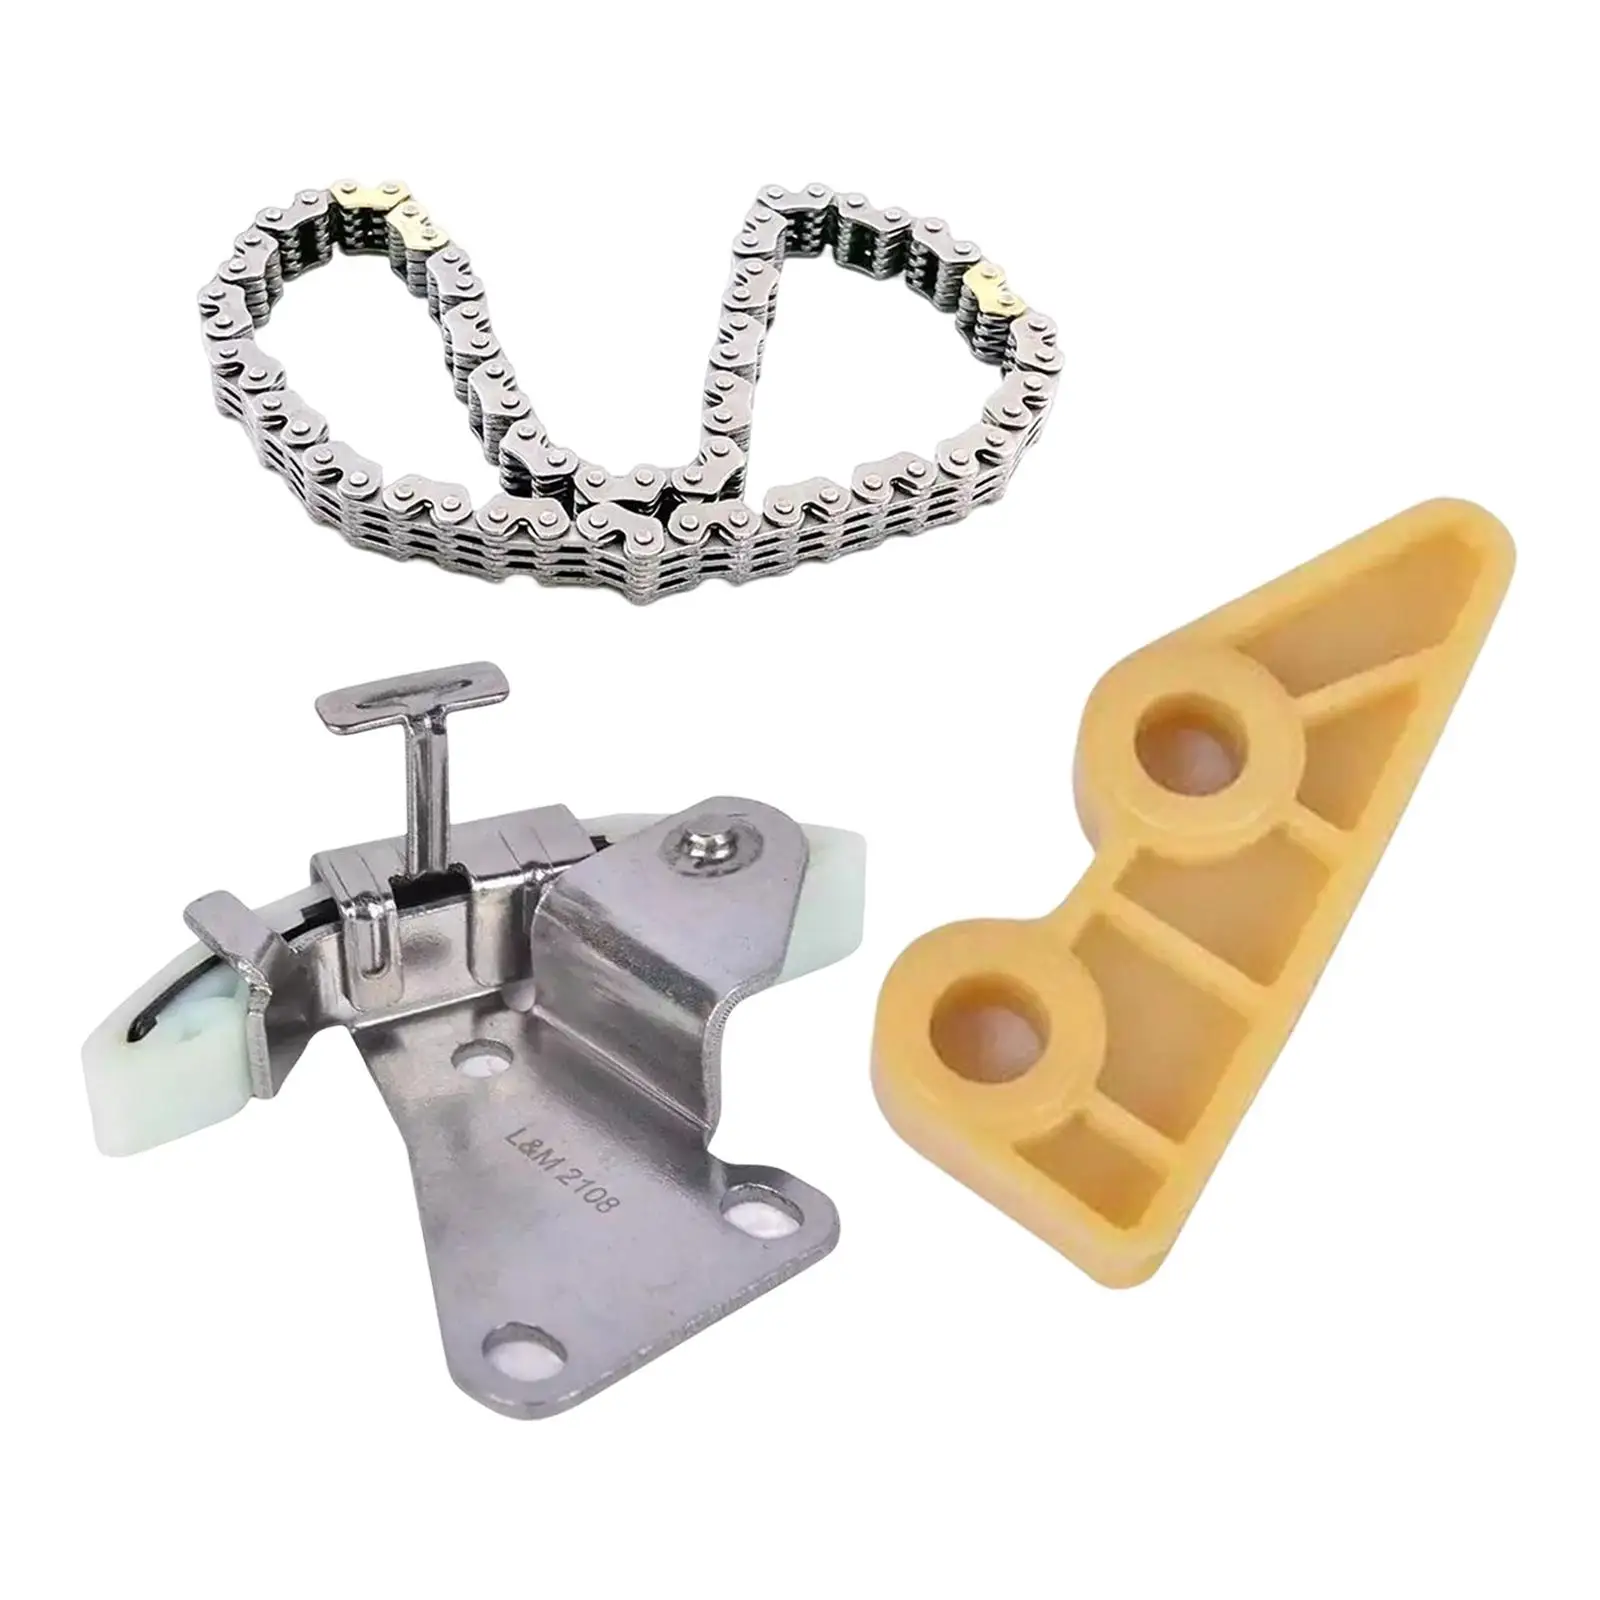 Car Oil Pump Chain Tensioner Guide Set for Honda Accessories Replaces